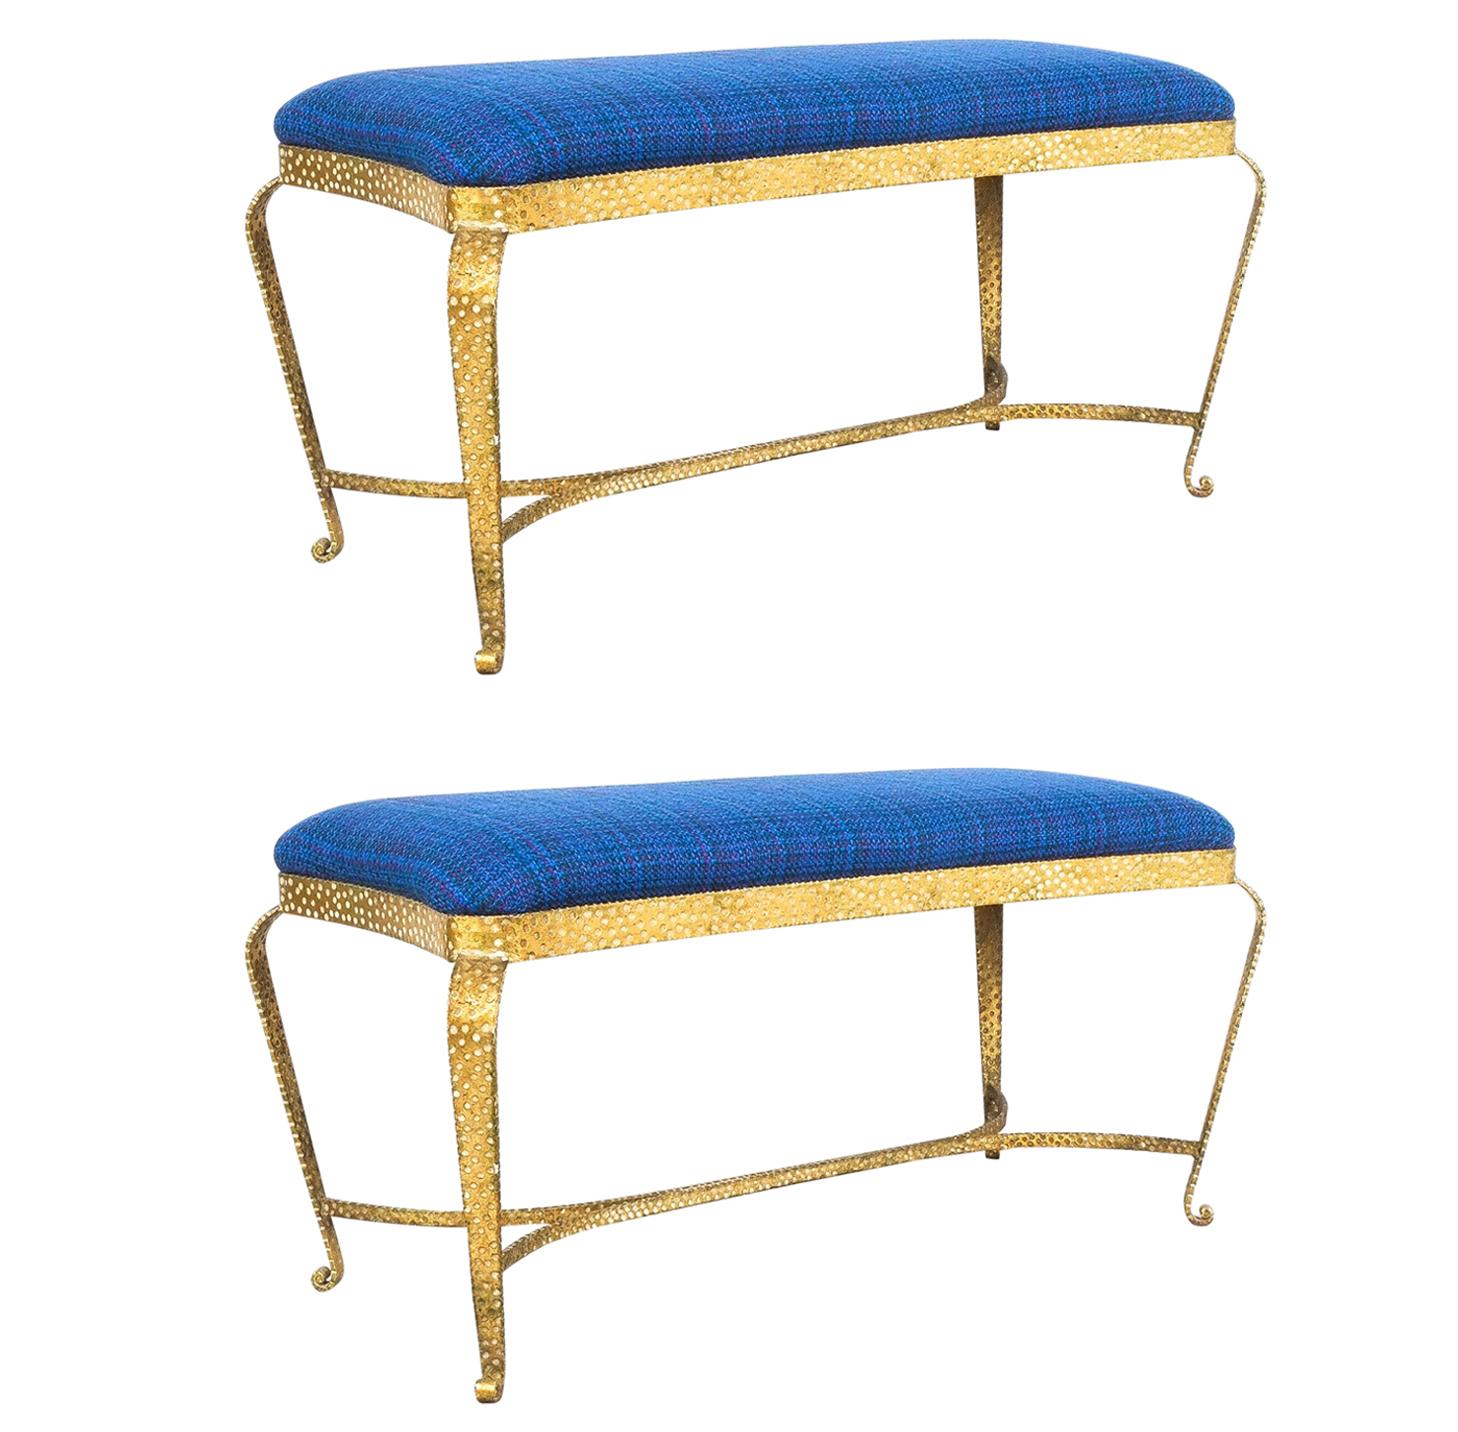 Large Gold Pier Luigi Colli Iron Bedroom Bench in Blue Fabric, Italy, 1950 4